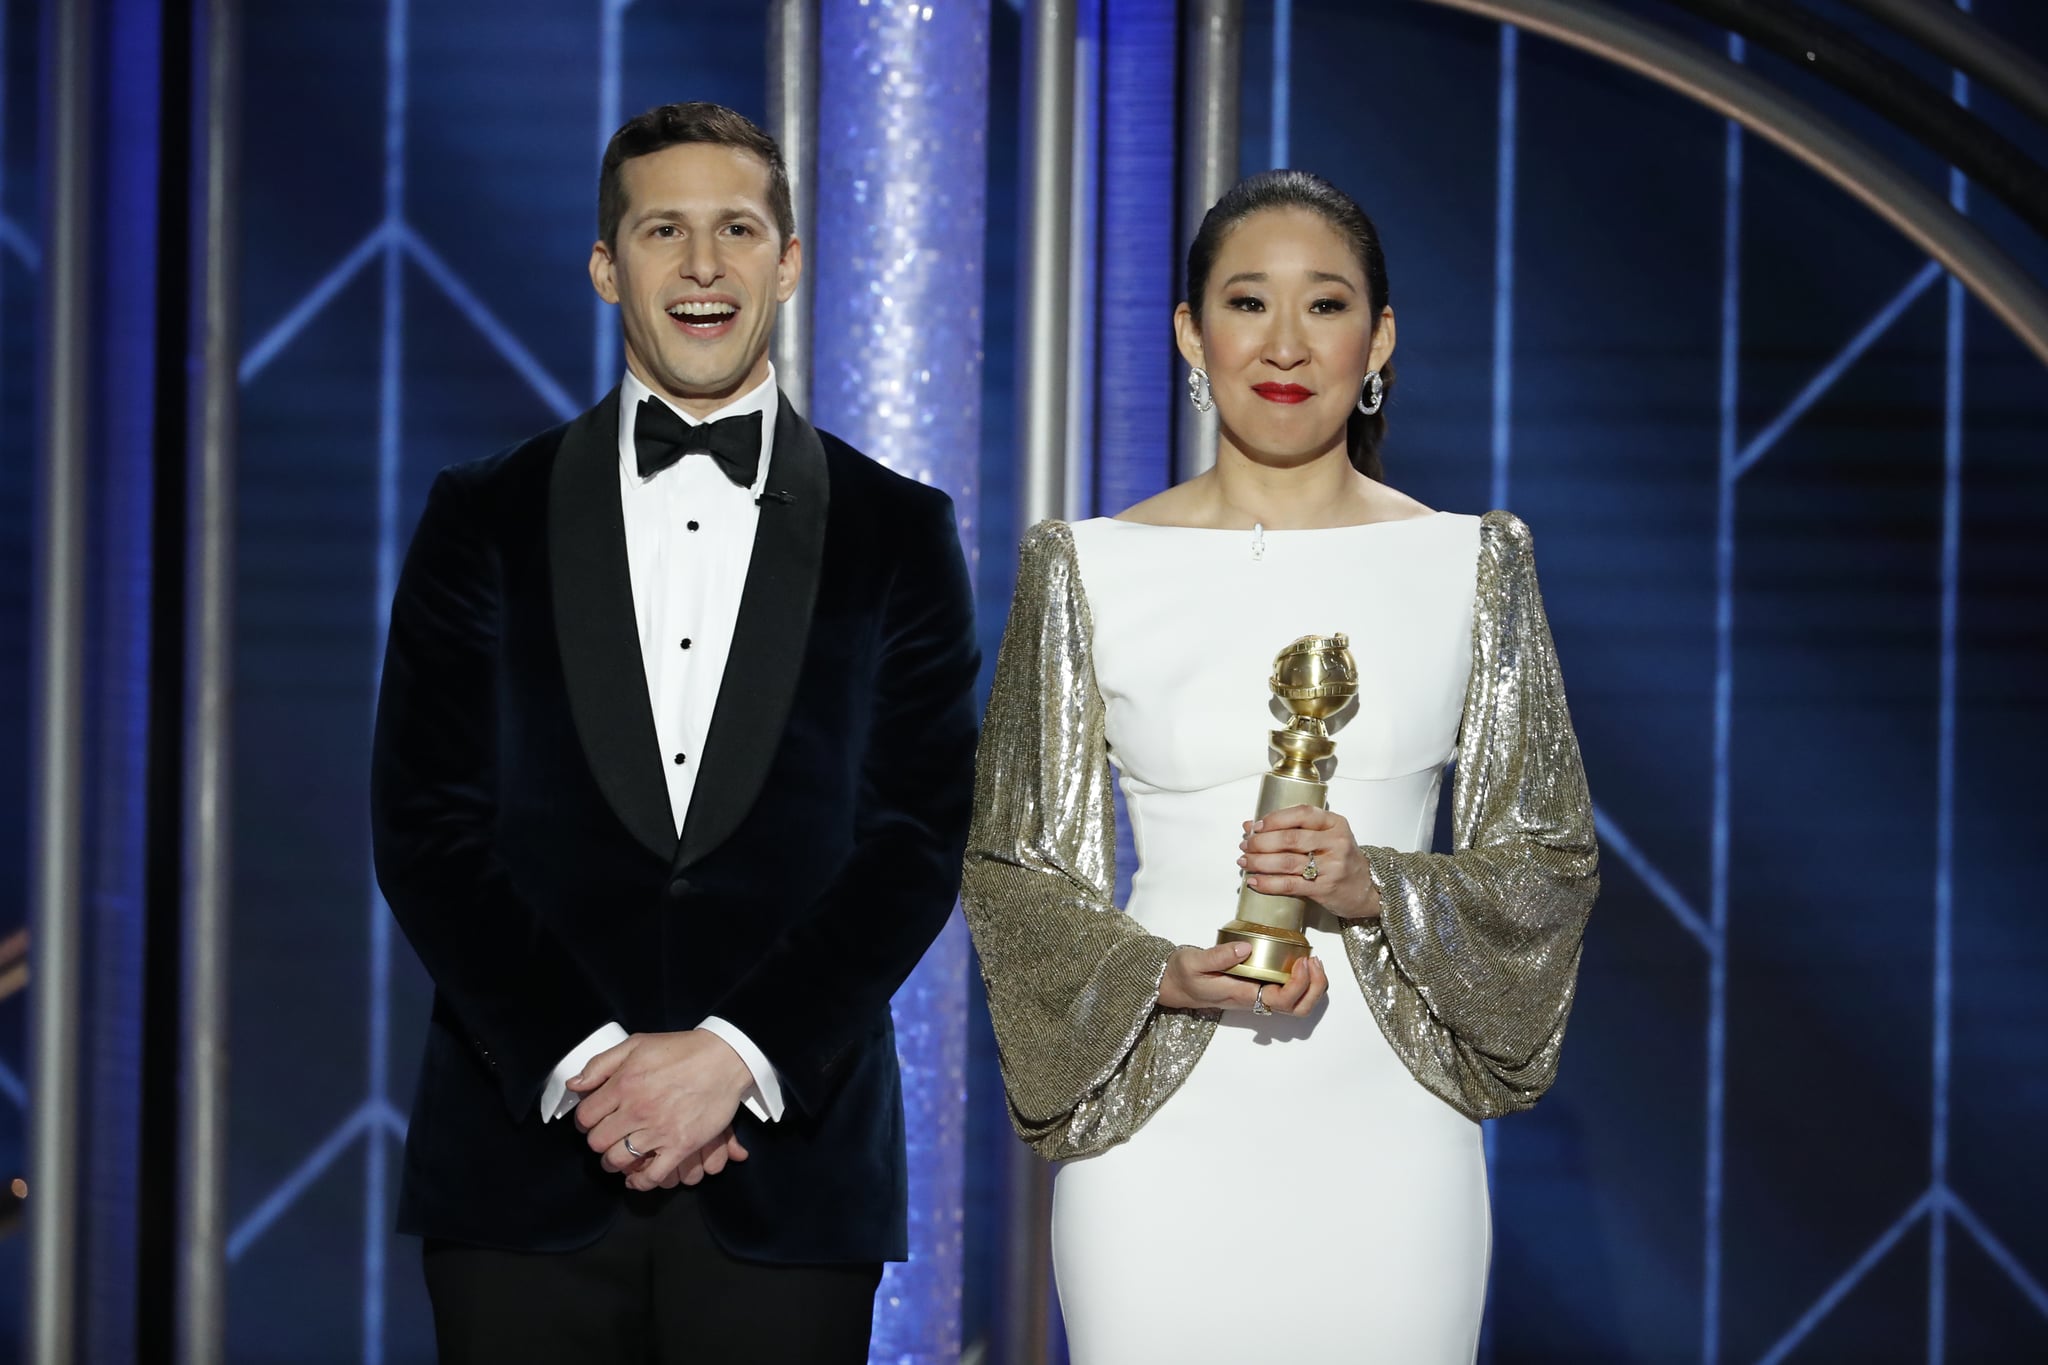 BEVERLY HILLS, CALIFORNIA - JANUARY 06: In this handout photo provided by NBCUniversal,  Hosts Andy Samberg and Sandra Oh speak onstage during the 76th Annual Golden Globe Awards at The Beverly Hilton Hotel on January 06, 2019 in Beverly Hills, California.  (Photo by Paul Drinkwater/NBCUniversal via Getty Images)